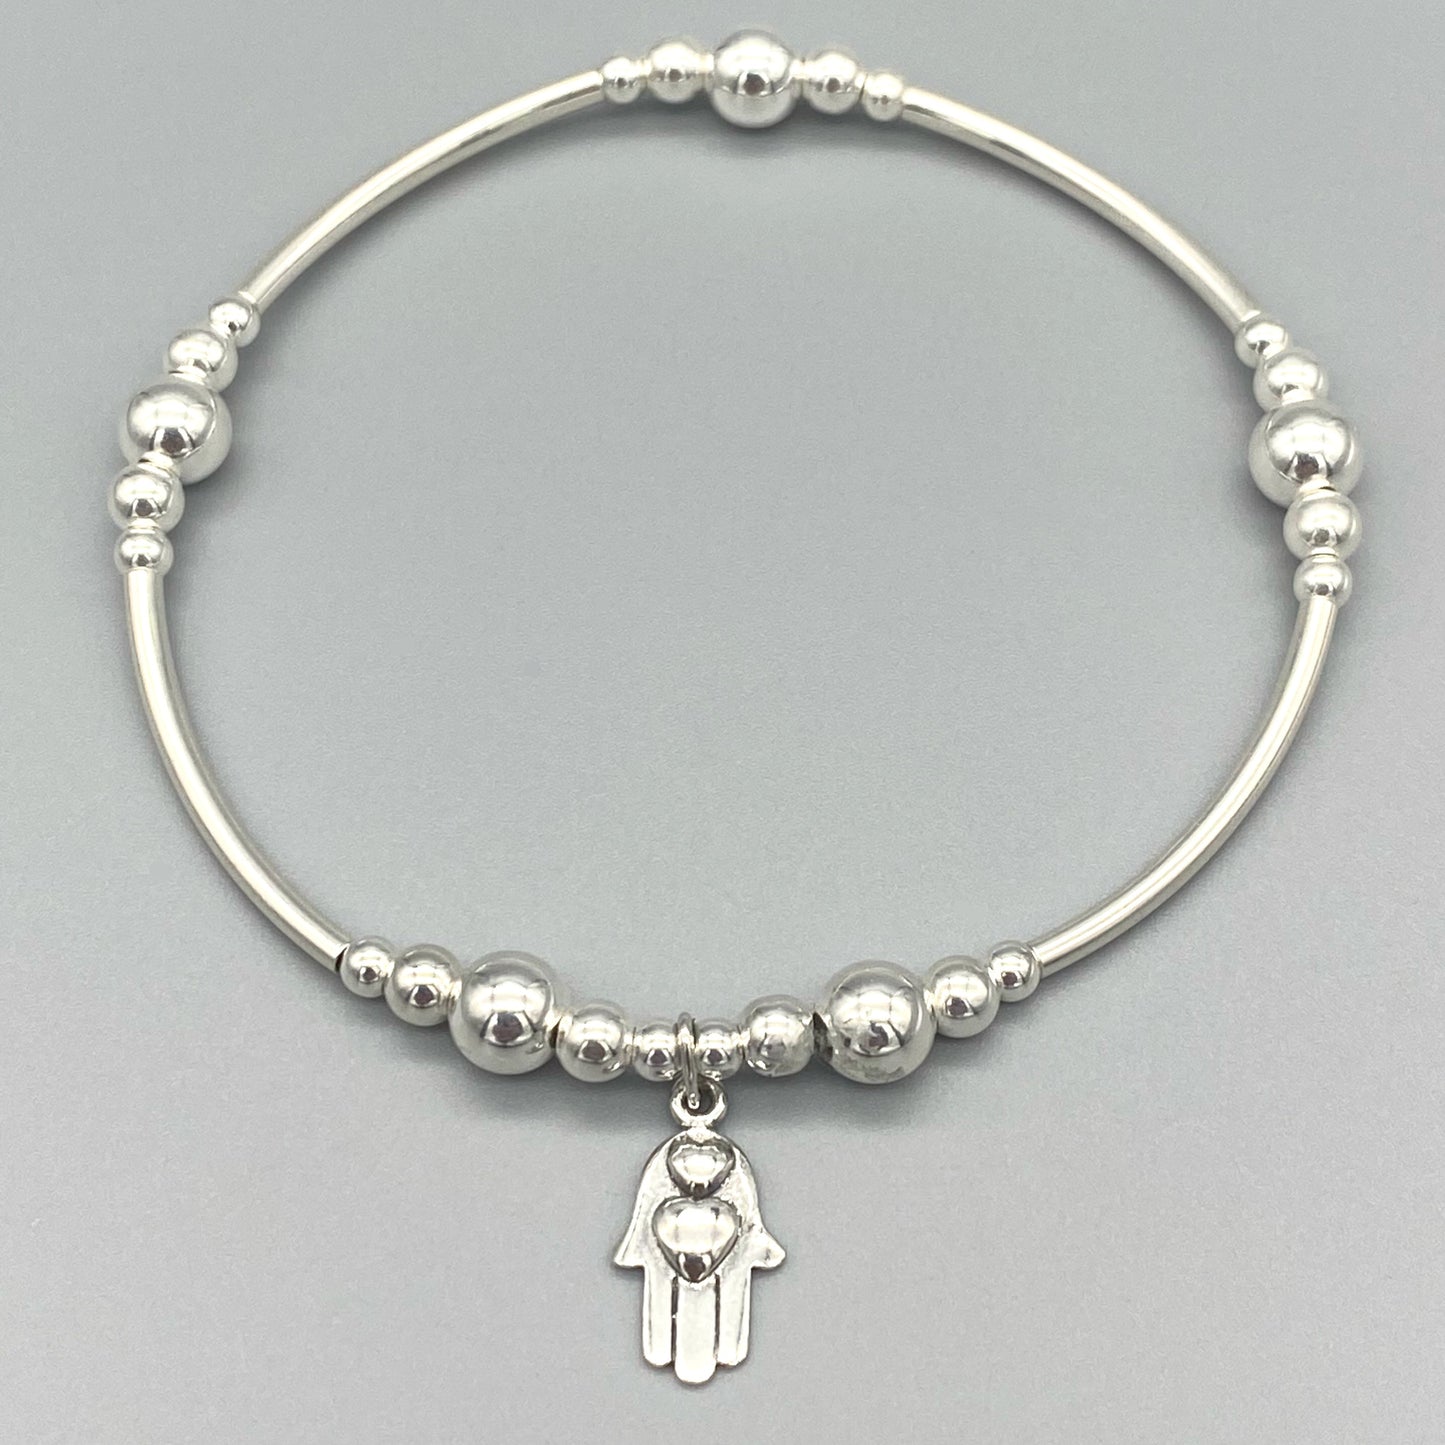 Hamsa hand hearts charm sterling silver stacking bracelet for her by My Silver Wish